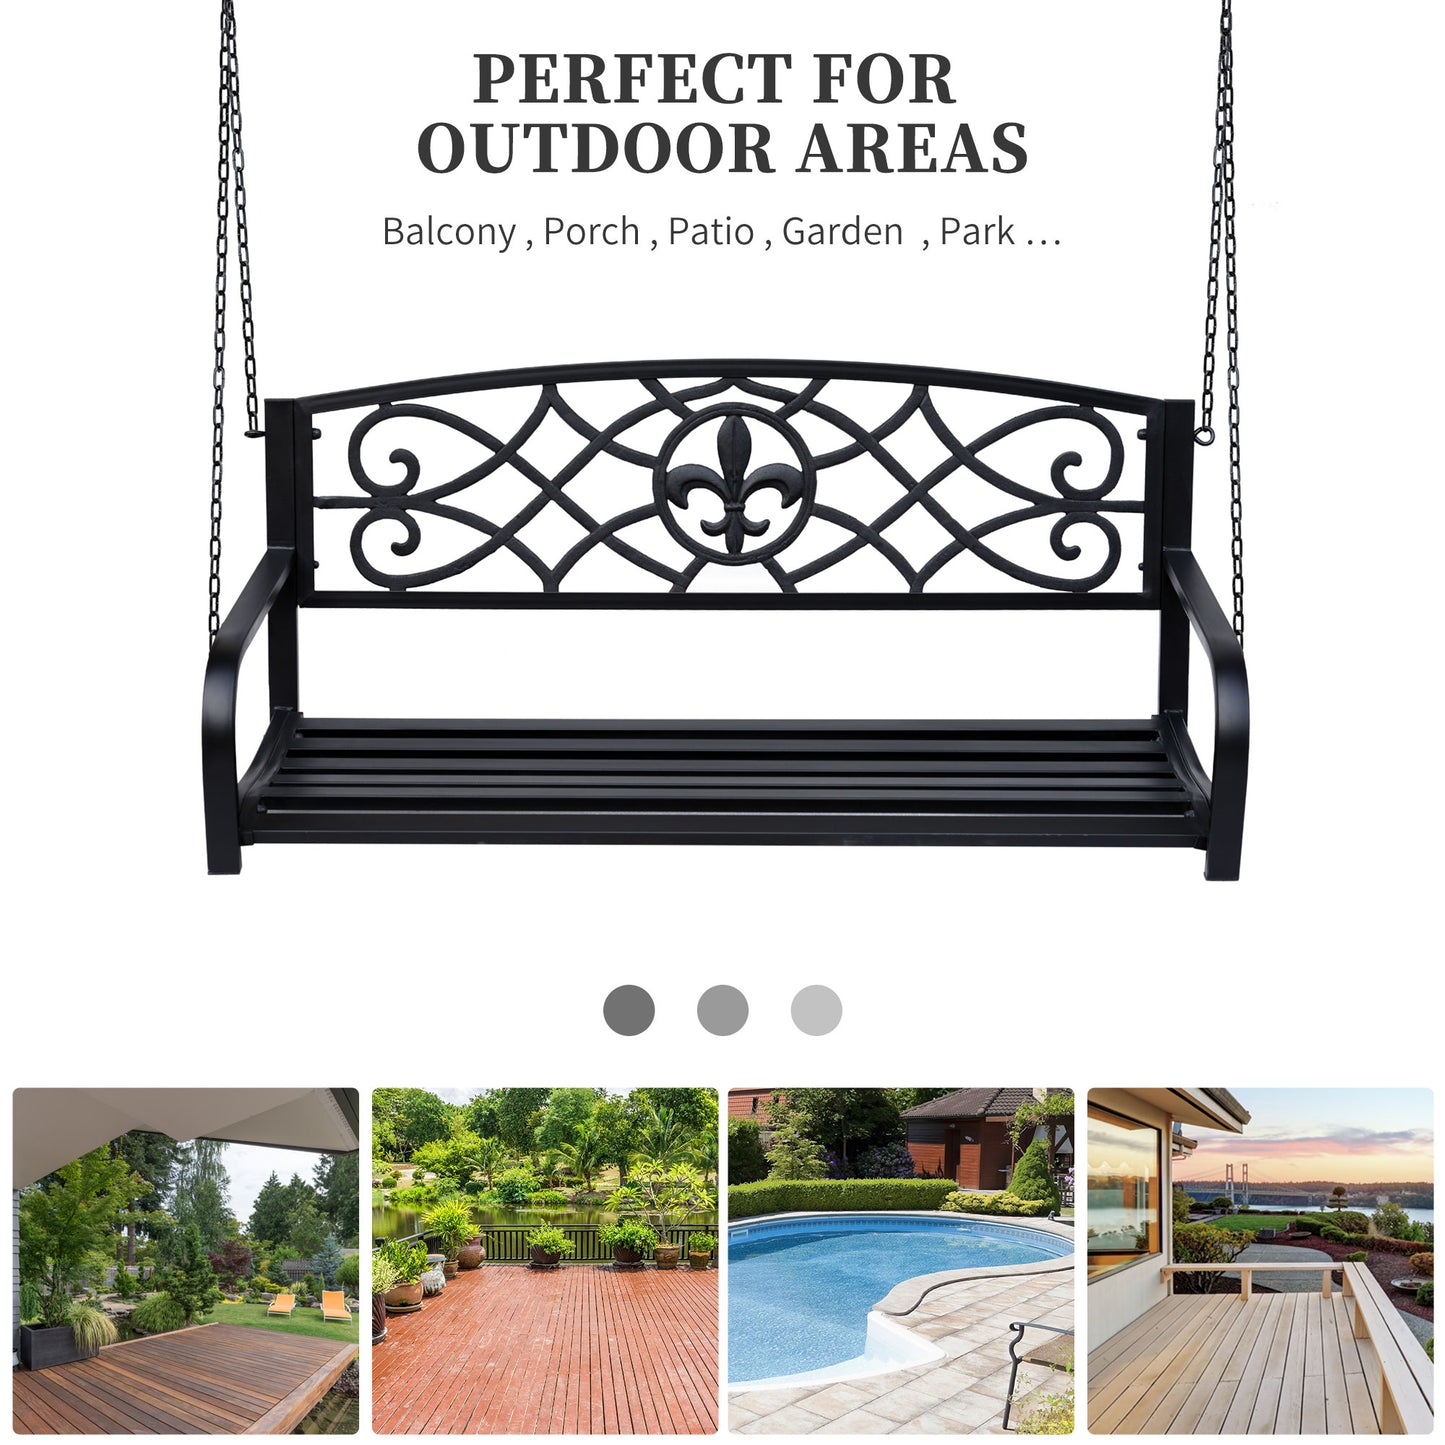 50"L Steel Porch Swing Fleur-De-Lis Patio Swing Chair Hanging Bench Outdoor 2-person Glider Chair Seat w/ Chain Antique Style Black at Gallery Canada